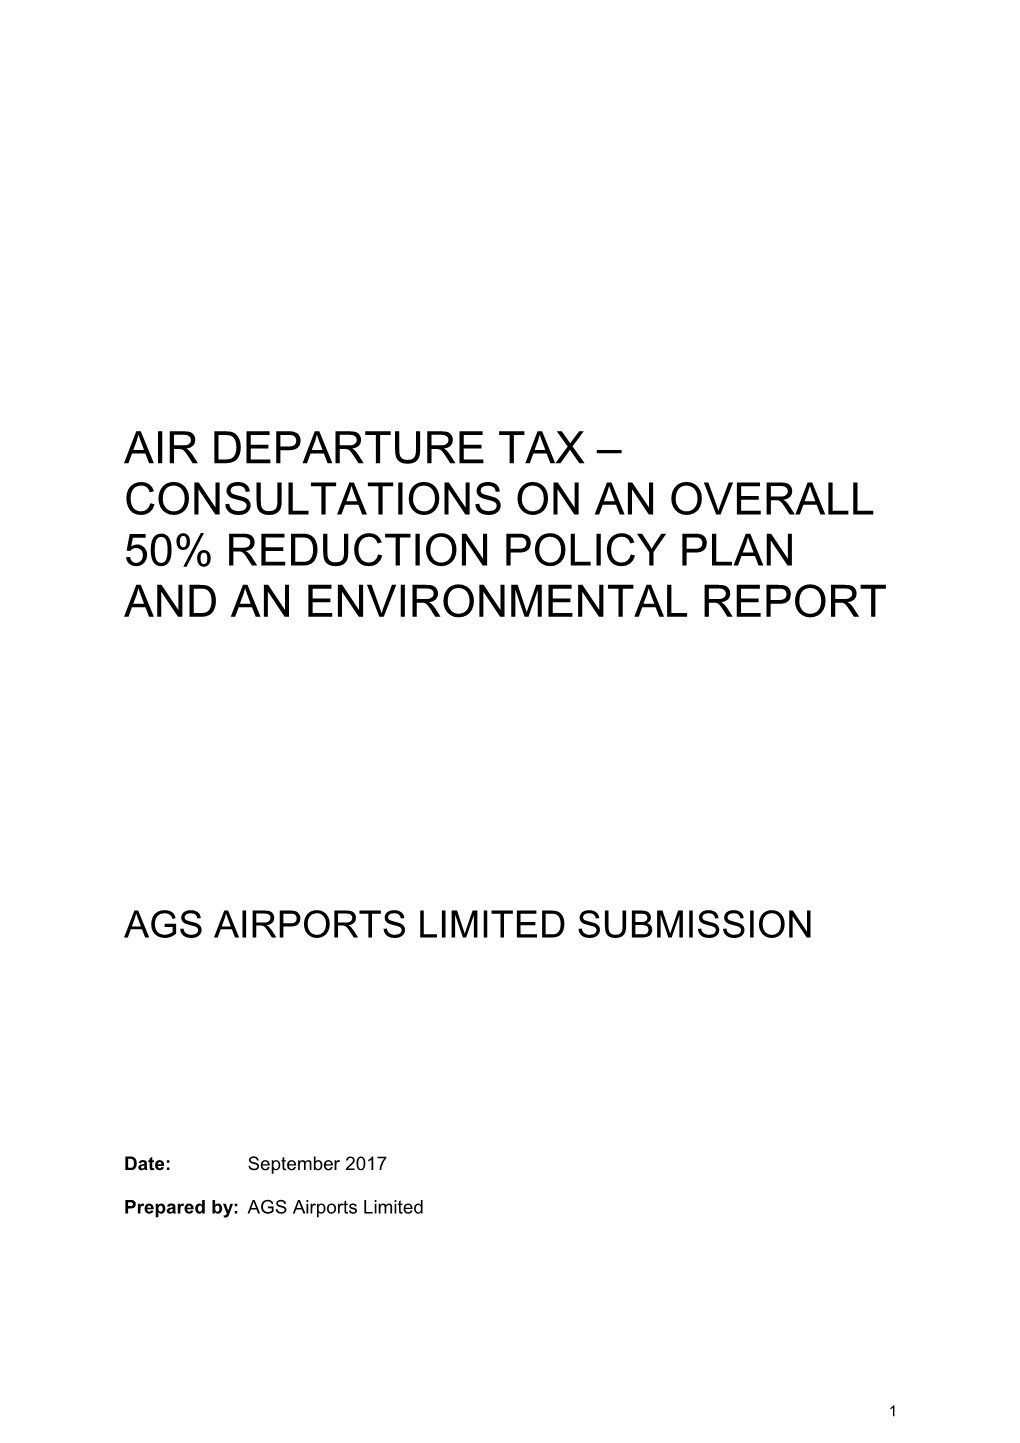 Air Departure Tax – Consultations on an Overall 50% Reduction Policy Plan and an Environmental Report